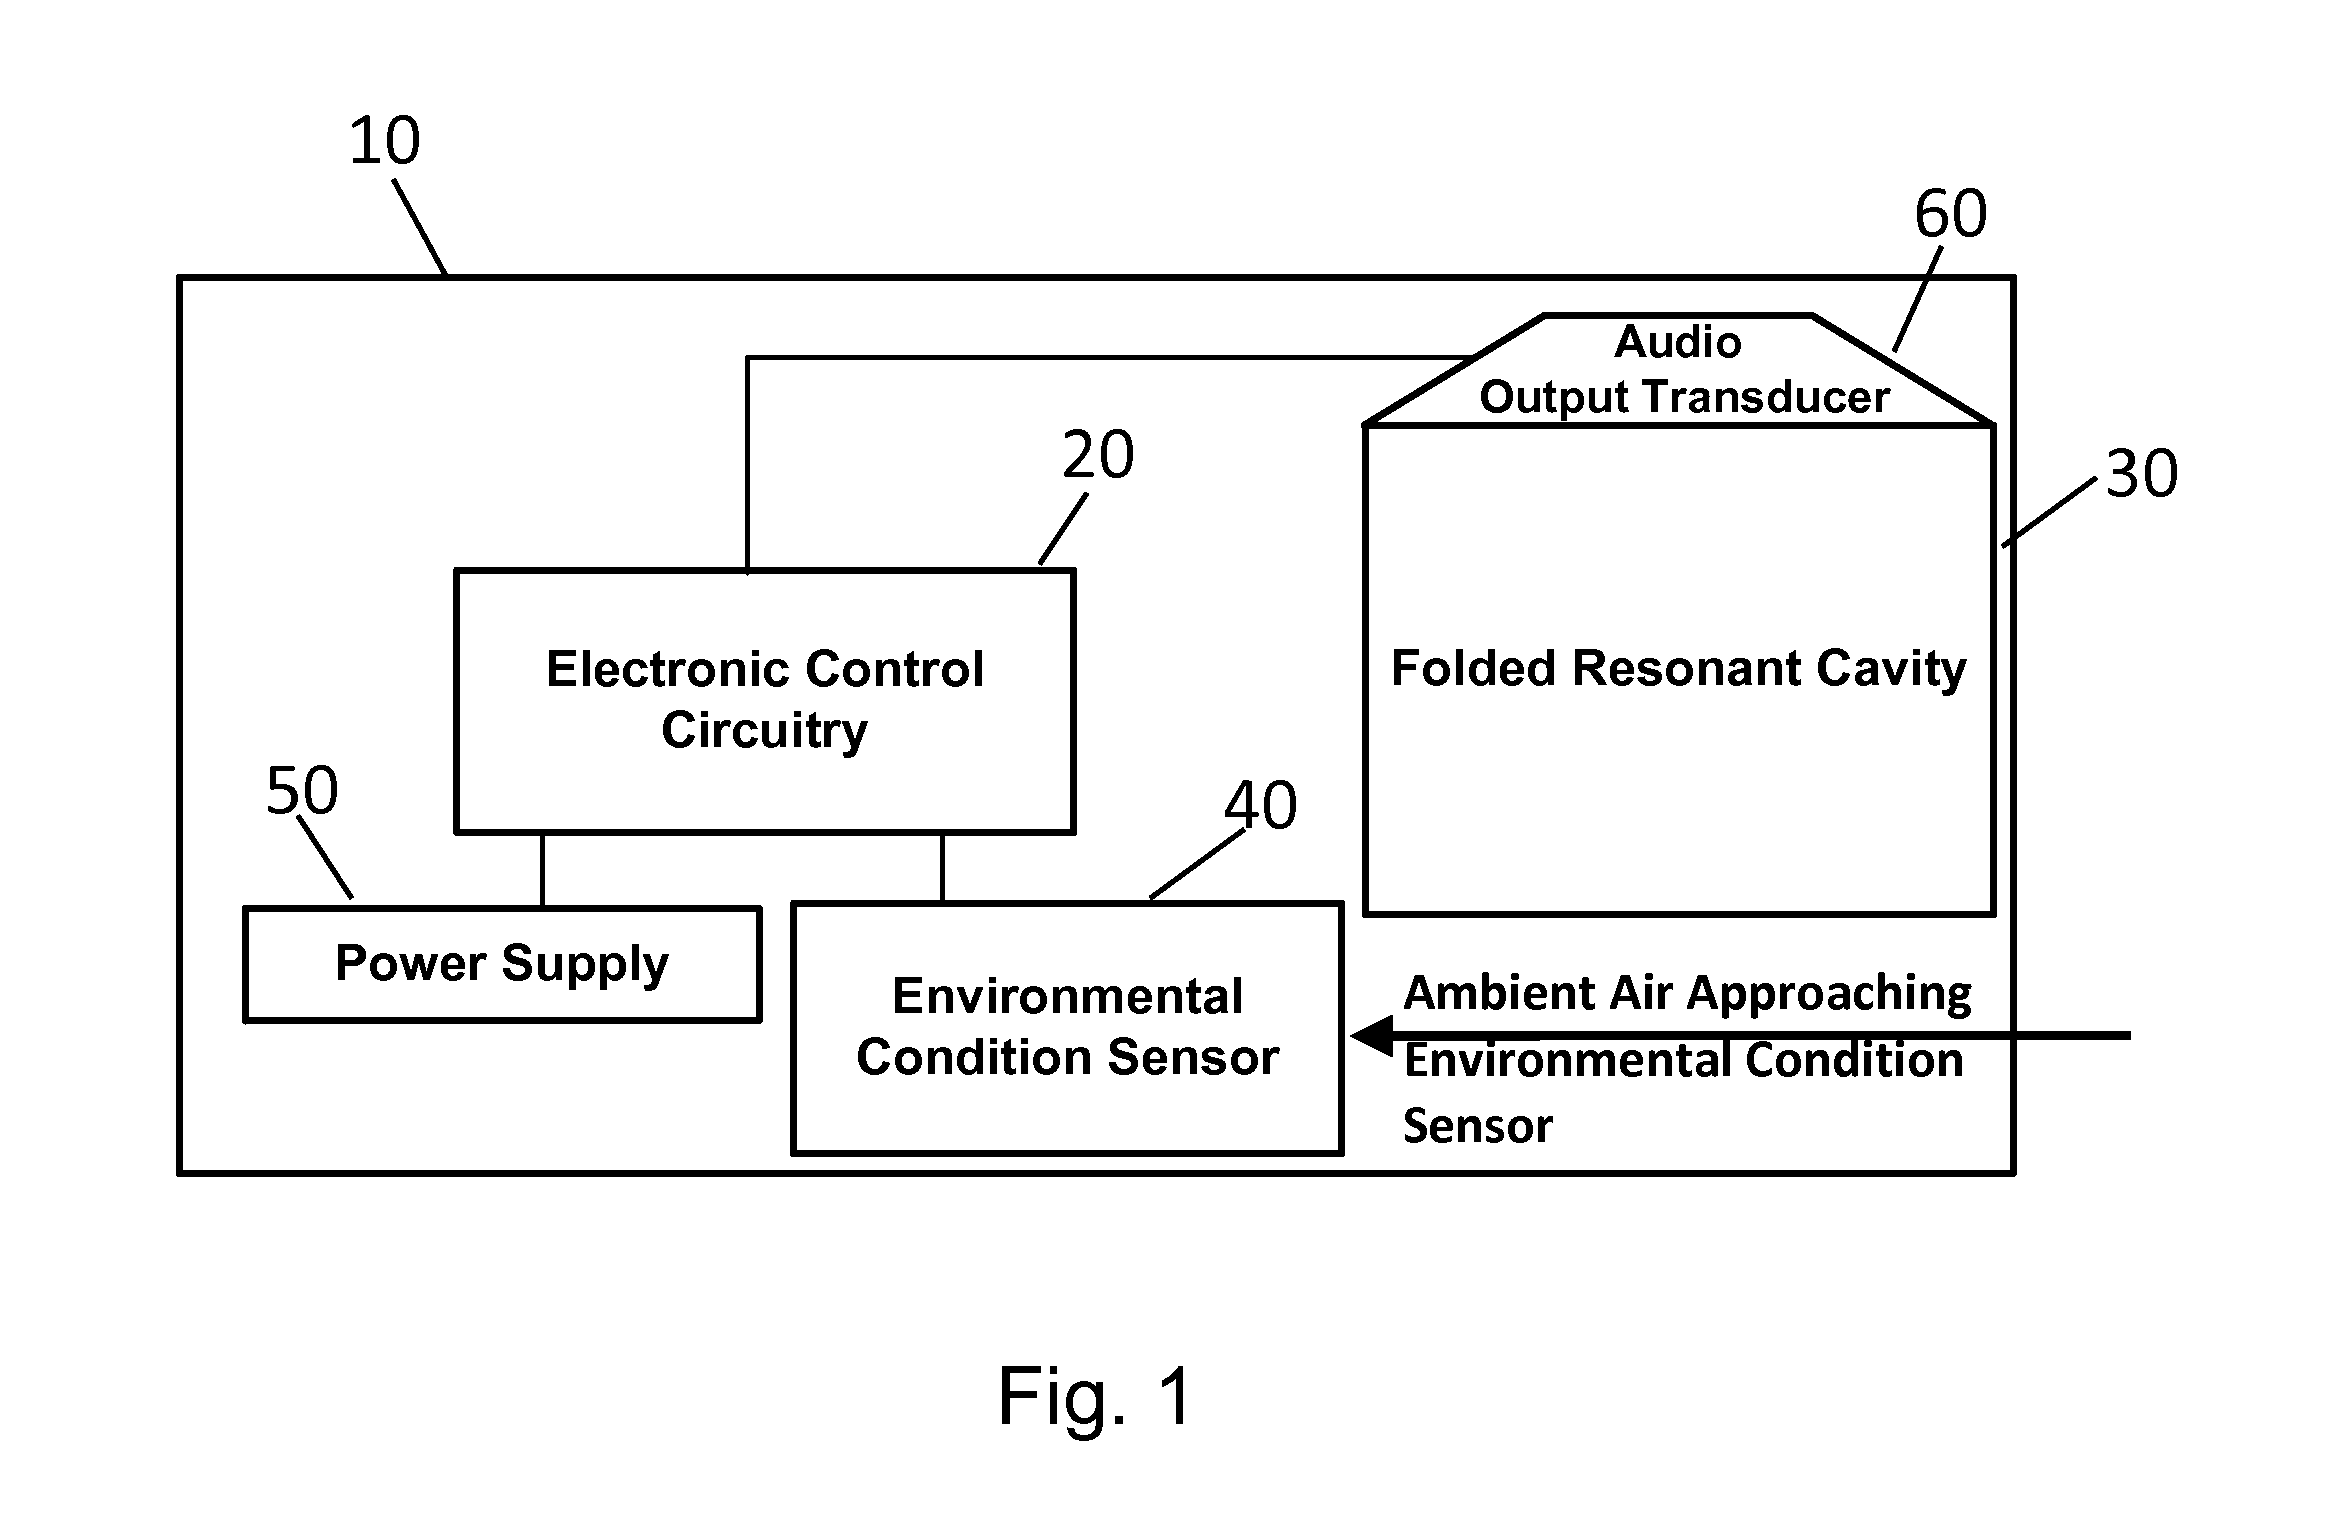 Life Safety Device with Folded Resonant Cavity for Low Frequency Alarm Tones